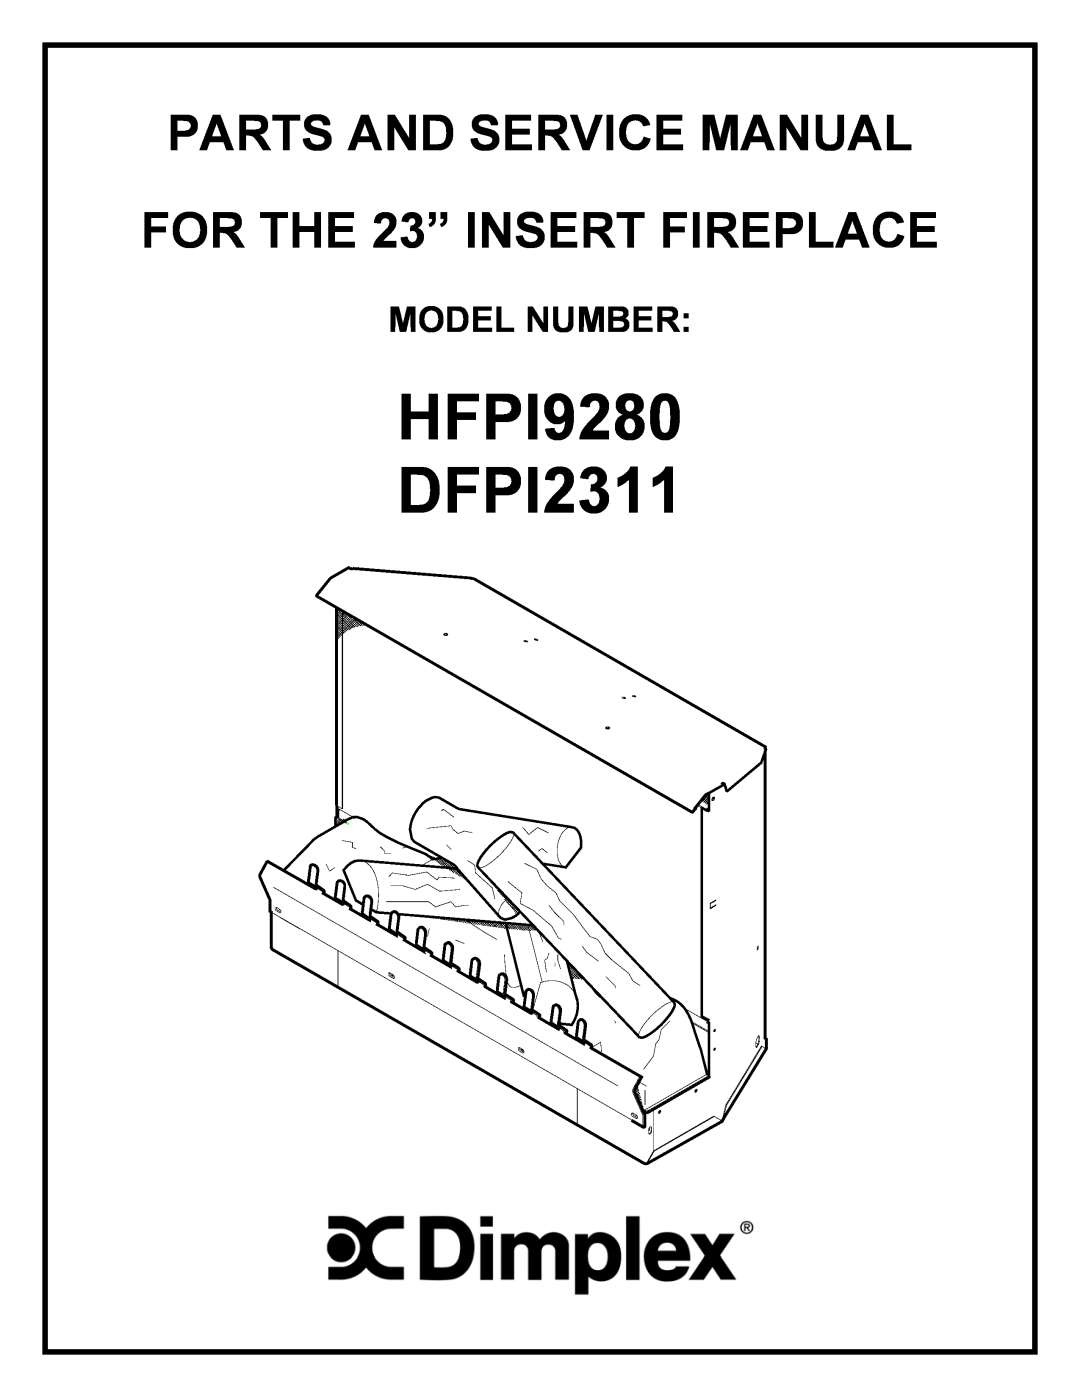 Dimplex DFPI2311 service manual HFPI9280, FOR THE 23” INSERT FIREPLACE, Model Number 